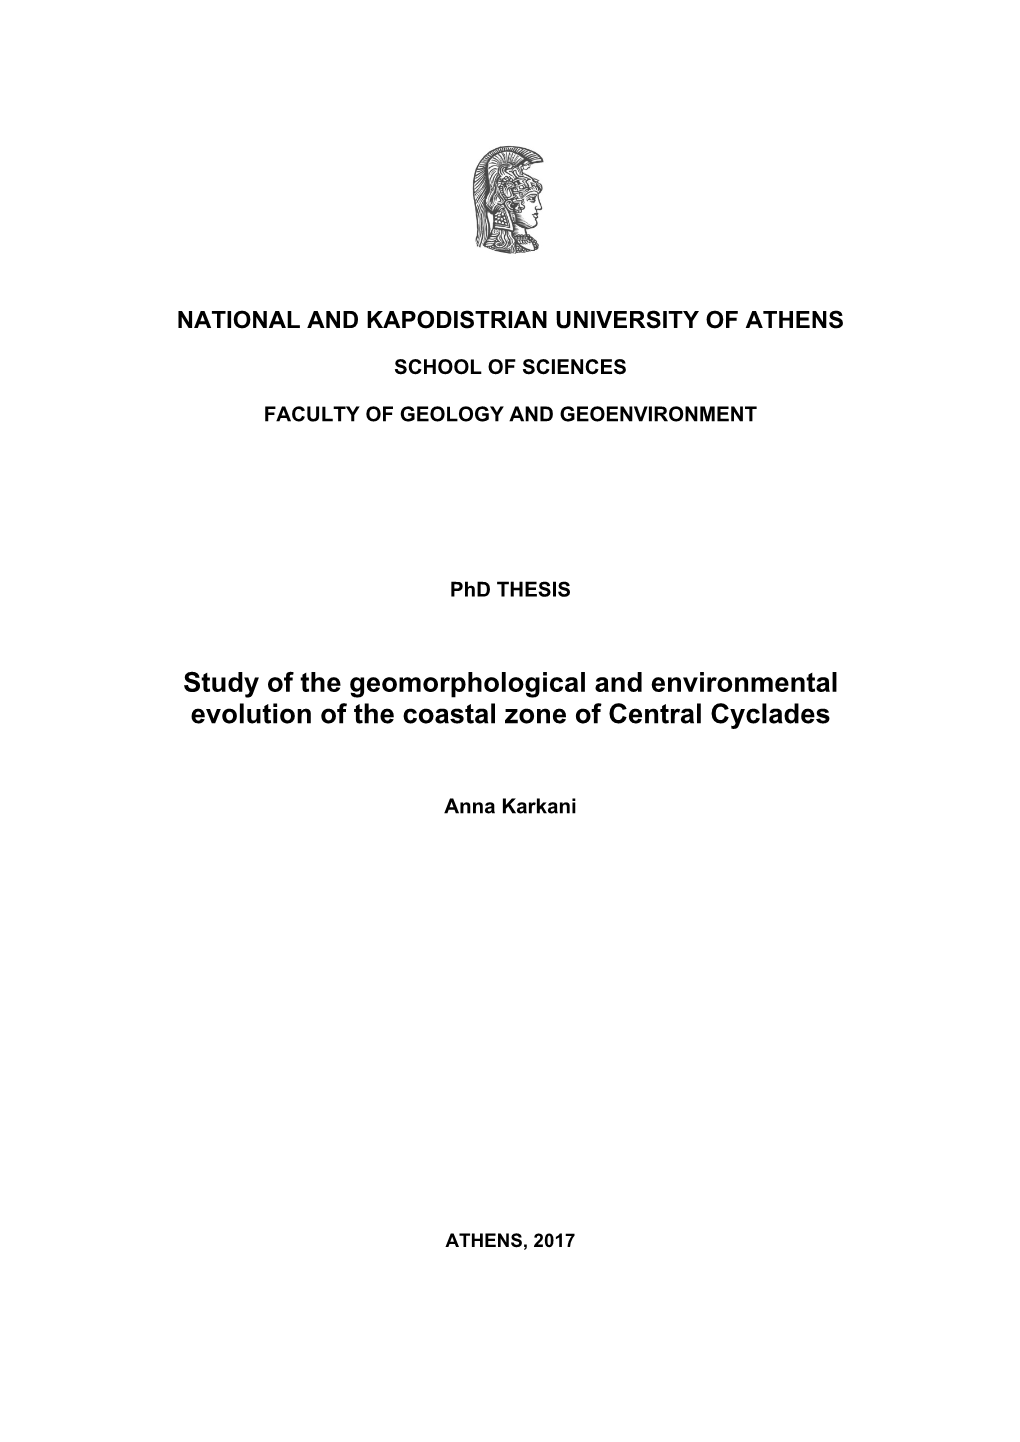 Study of the Geomorphological and Environmental Evolution of the Coastal Zone of Central Cyclades